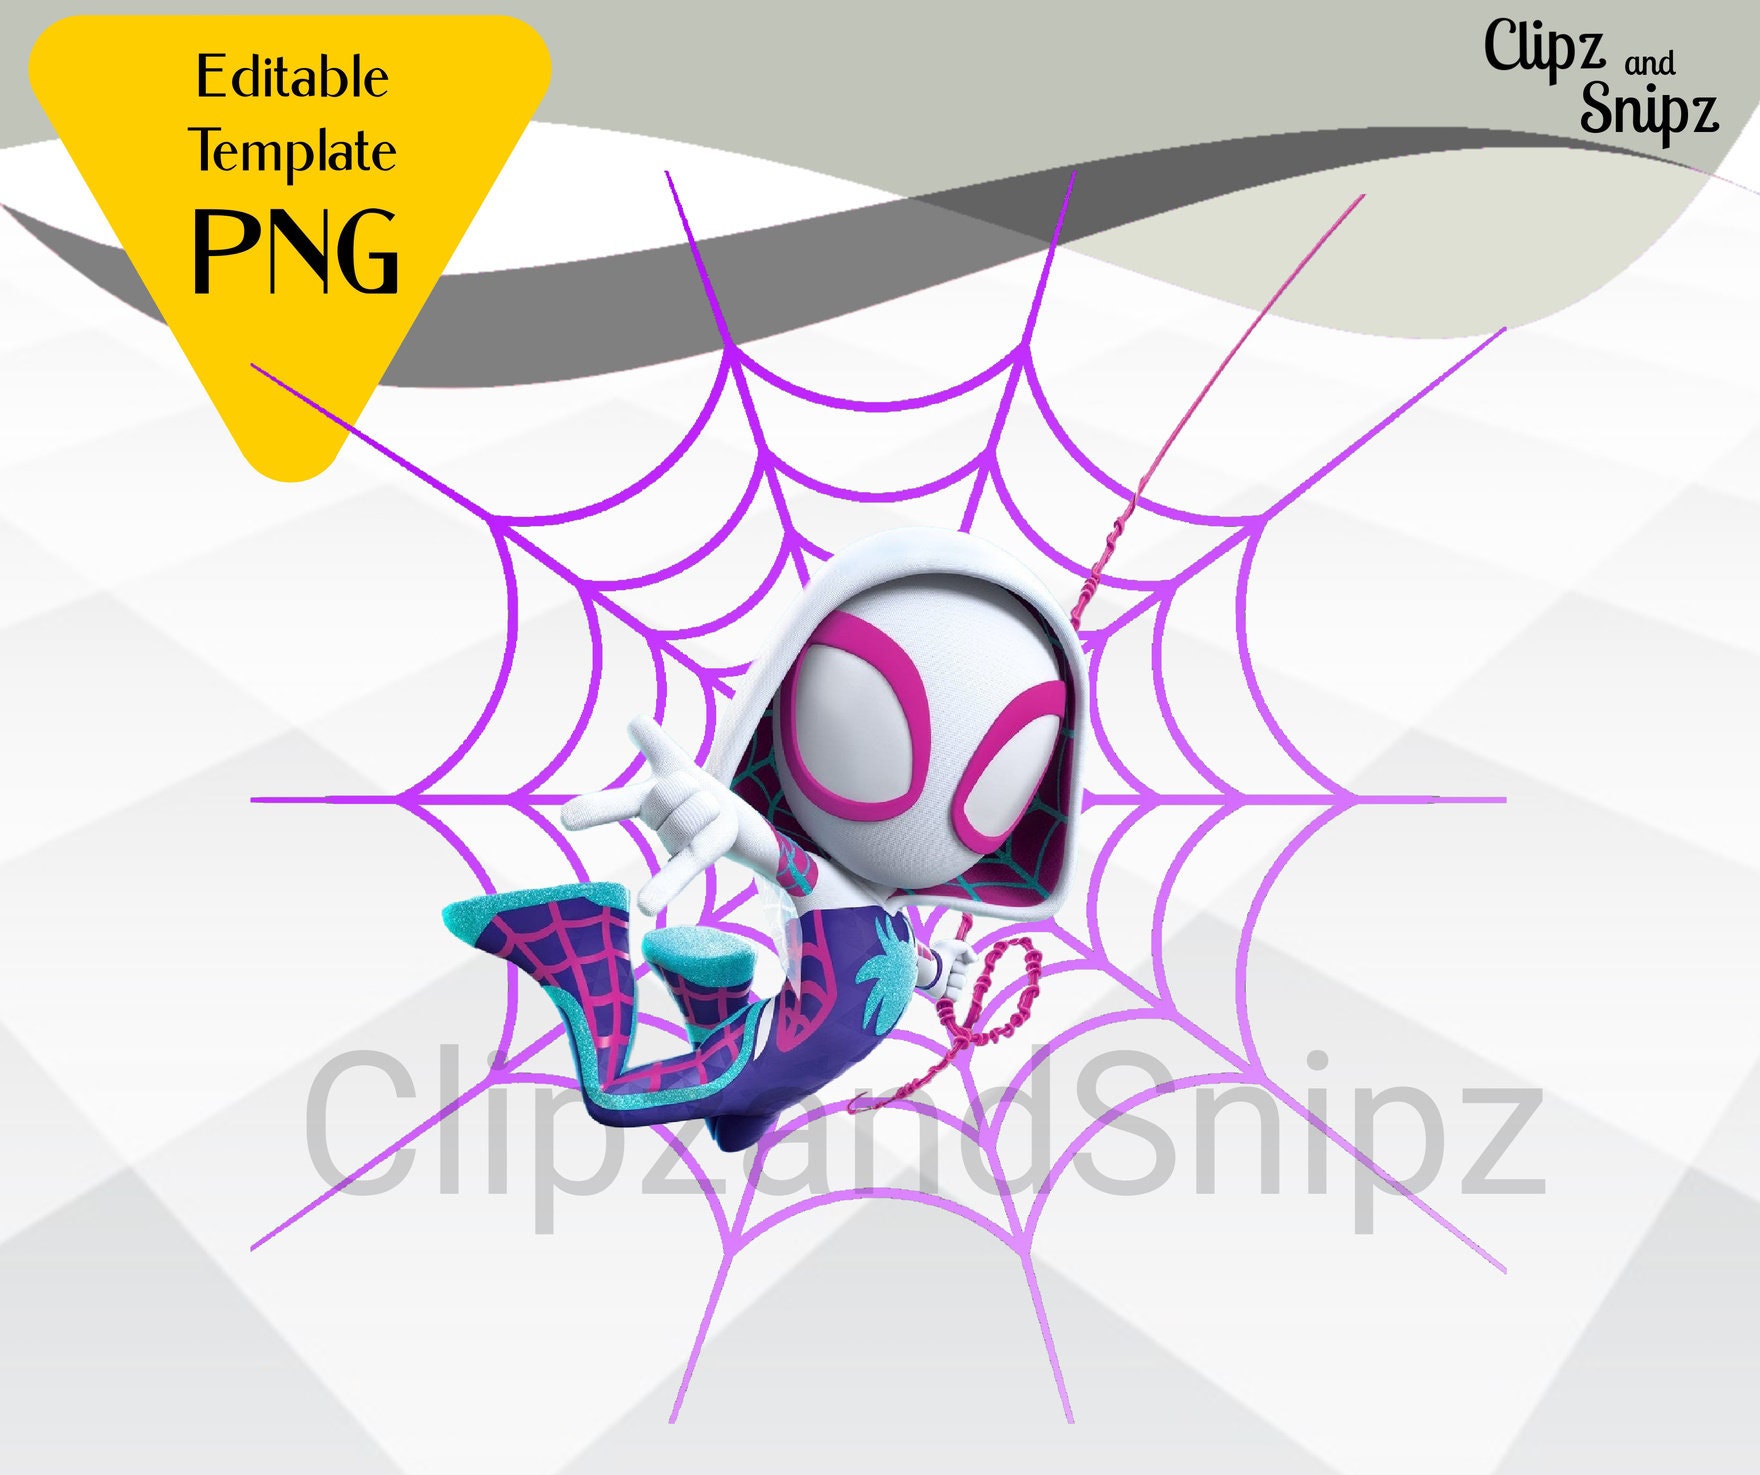 Ghost-Spider Cutout (Spidey and His Amazing Friends)